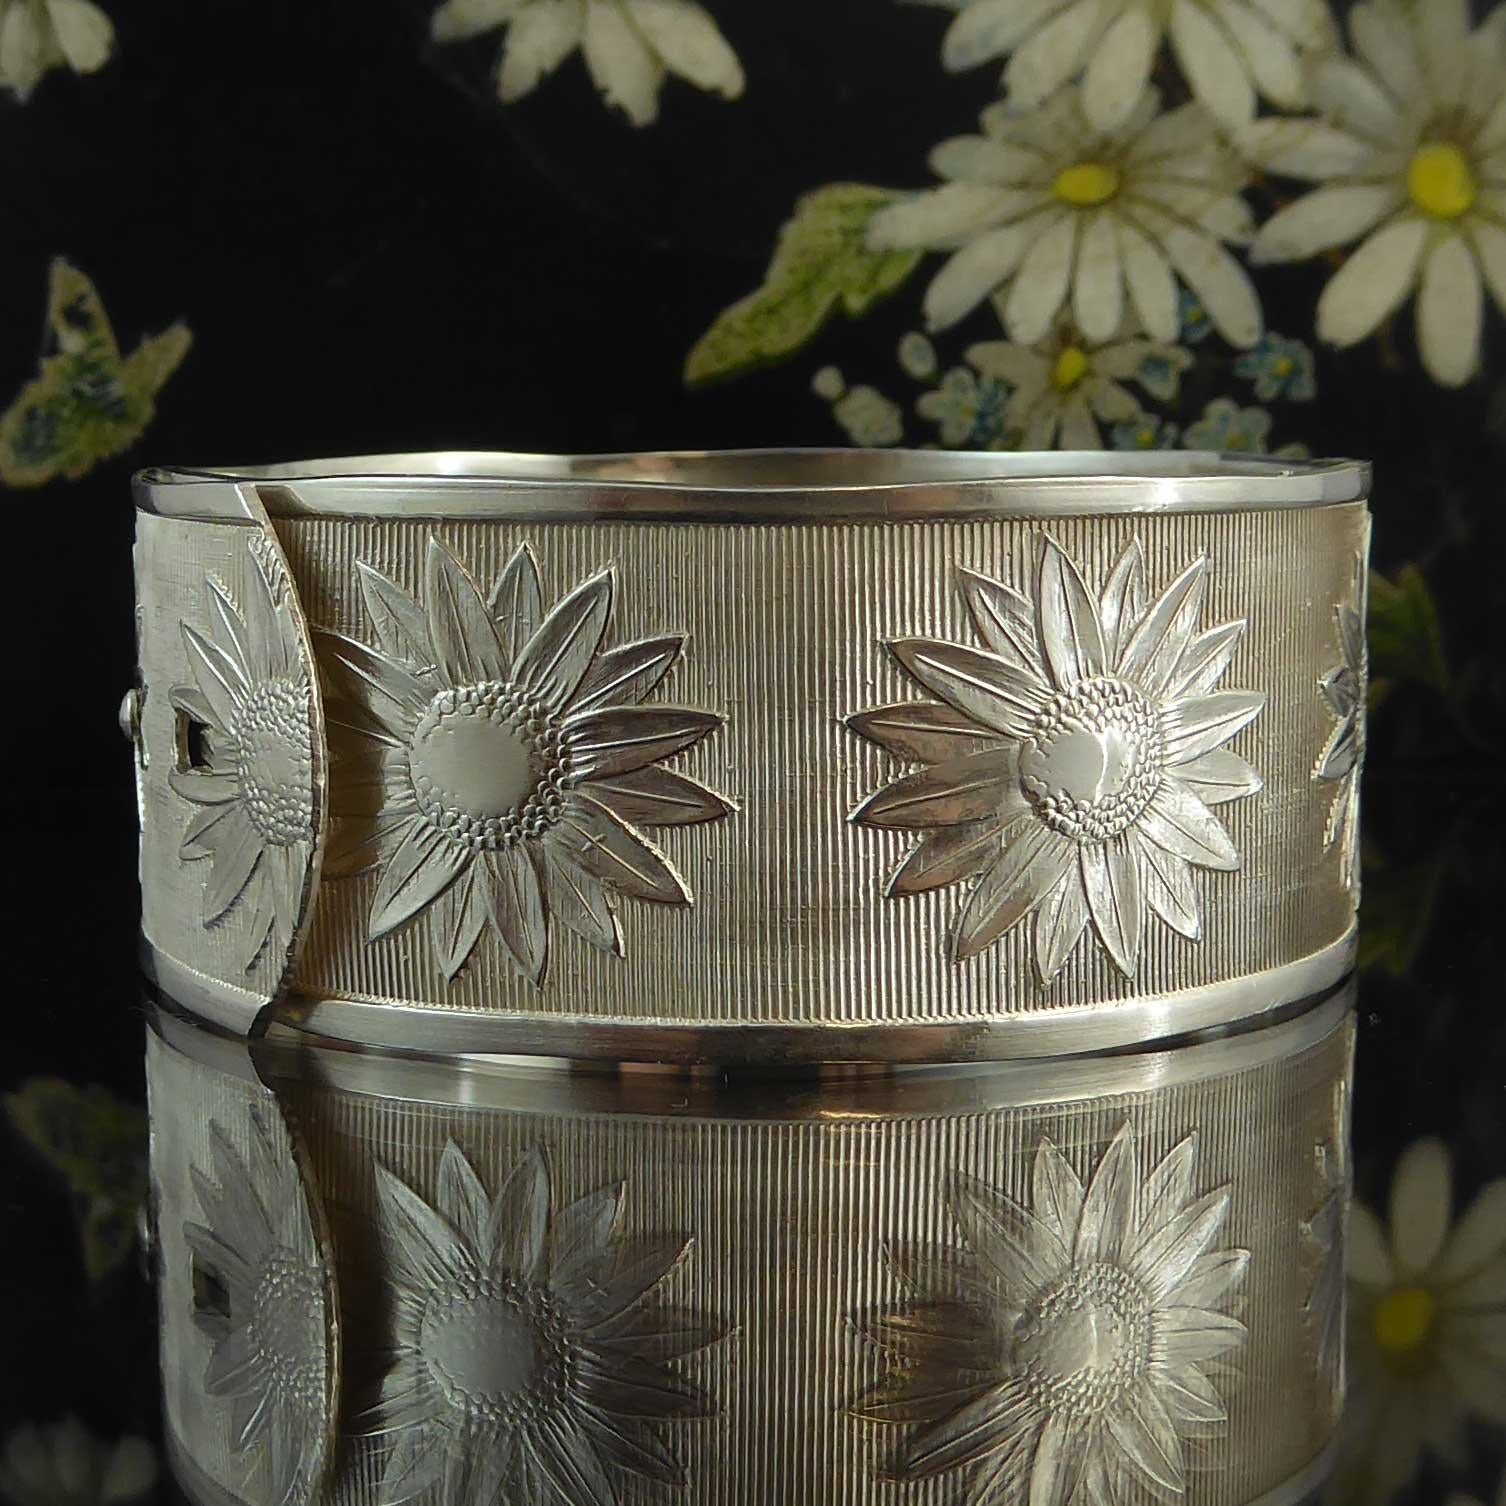 1940s Silver Buckle Bangle, Daisy Flower Pattern, Adjustable, Hallmarked Chester 2